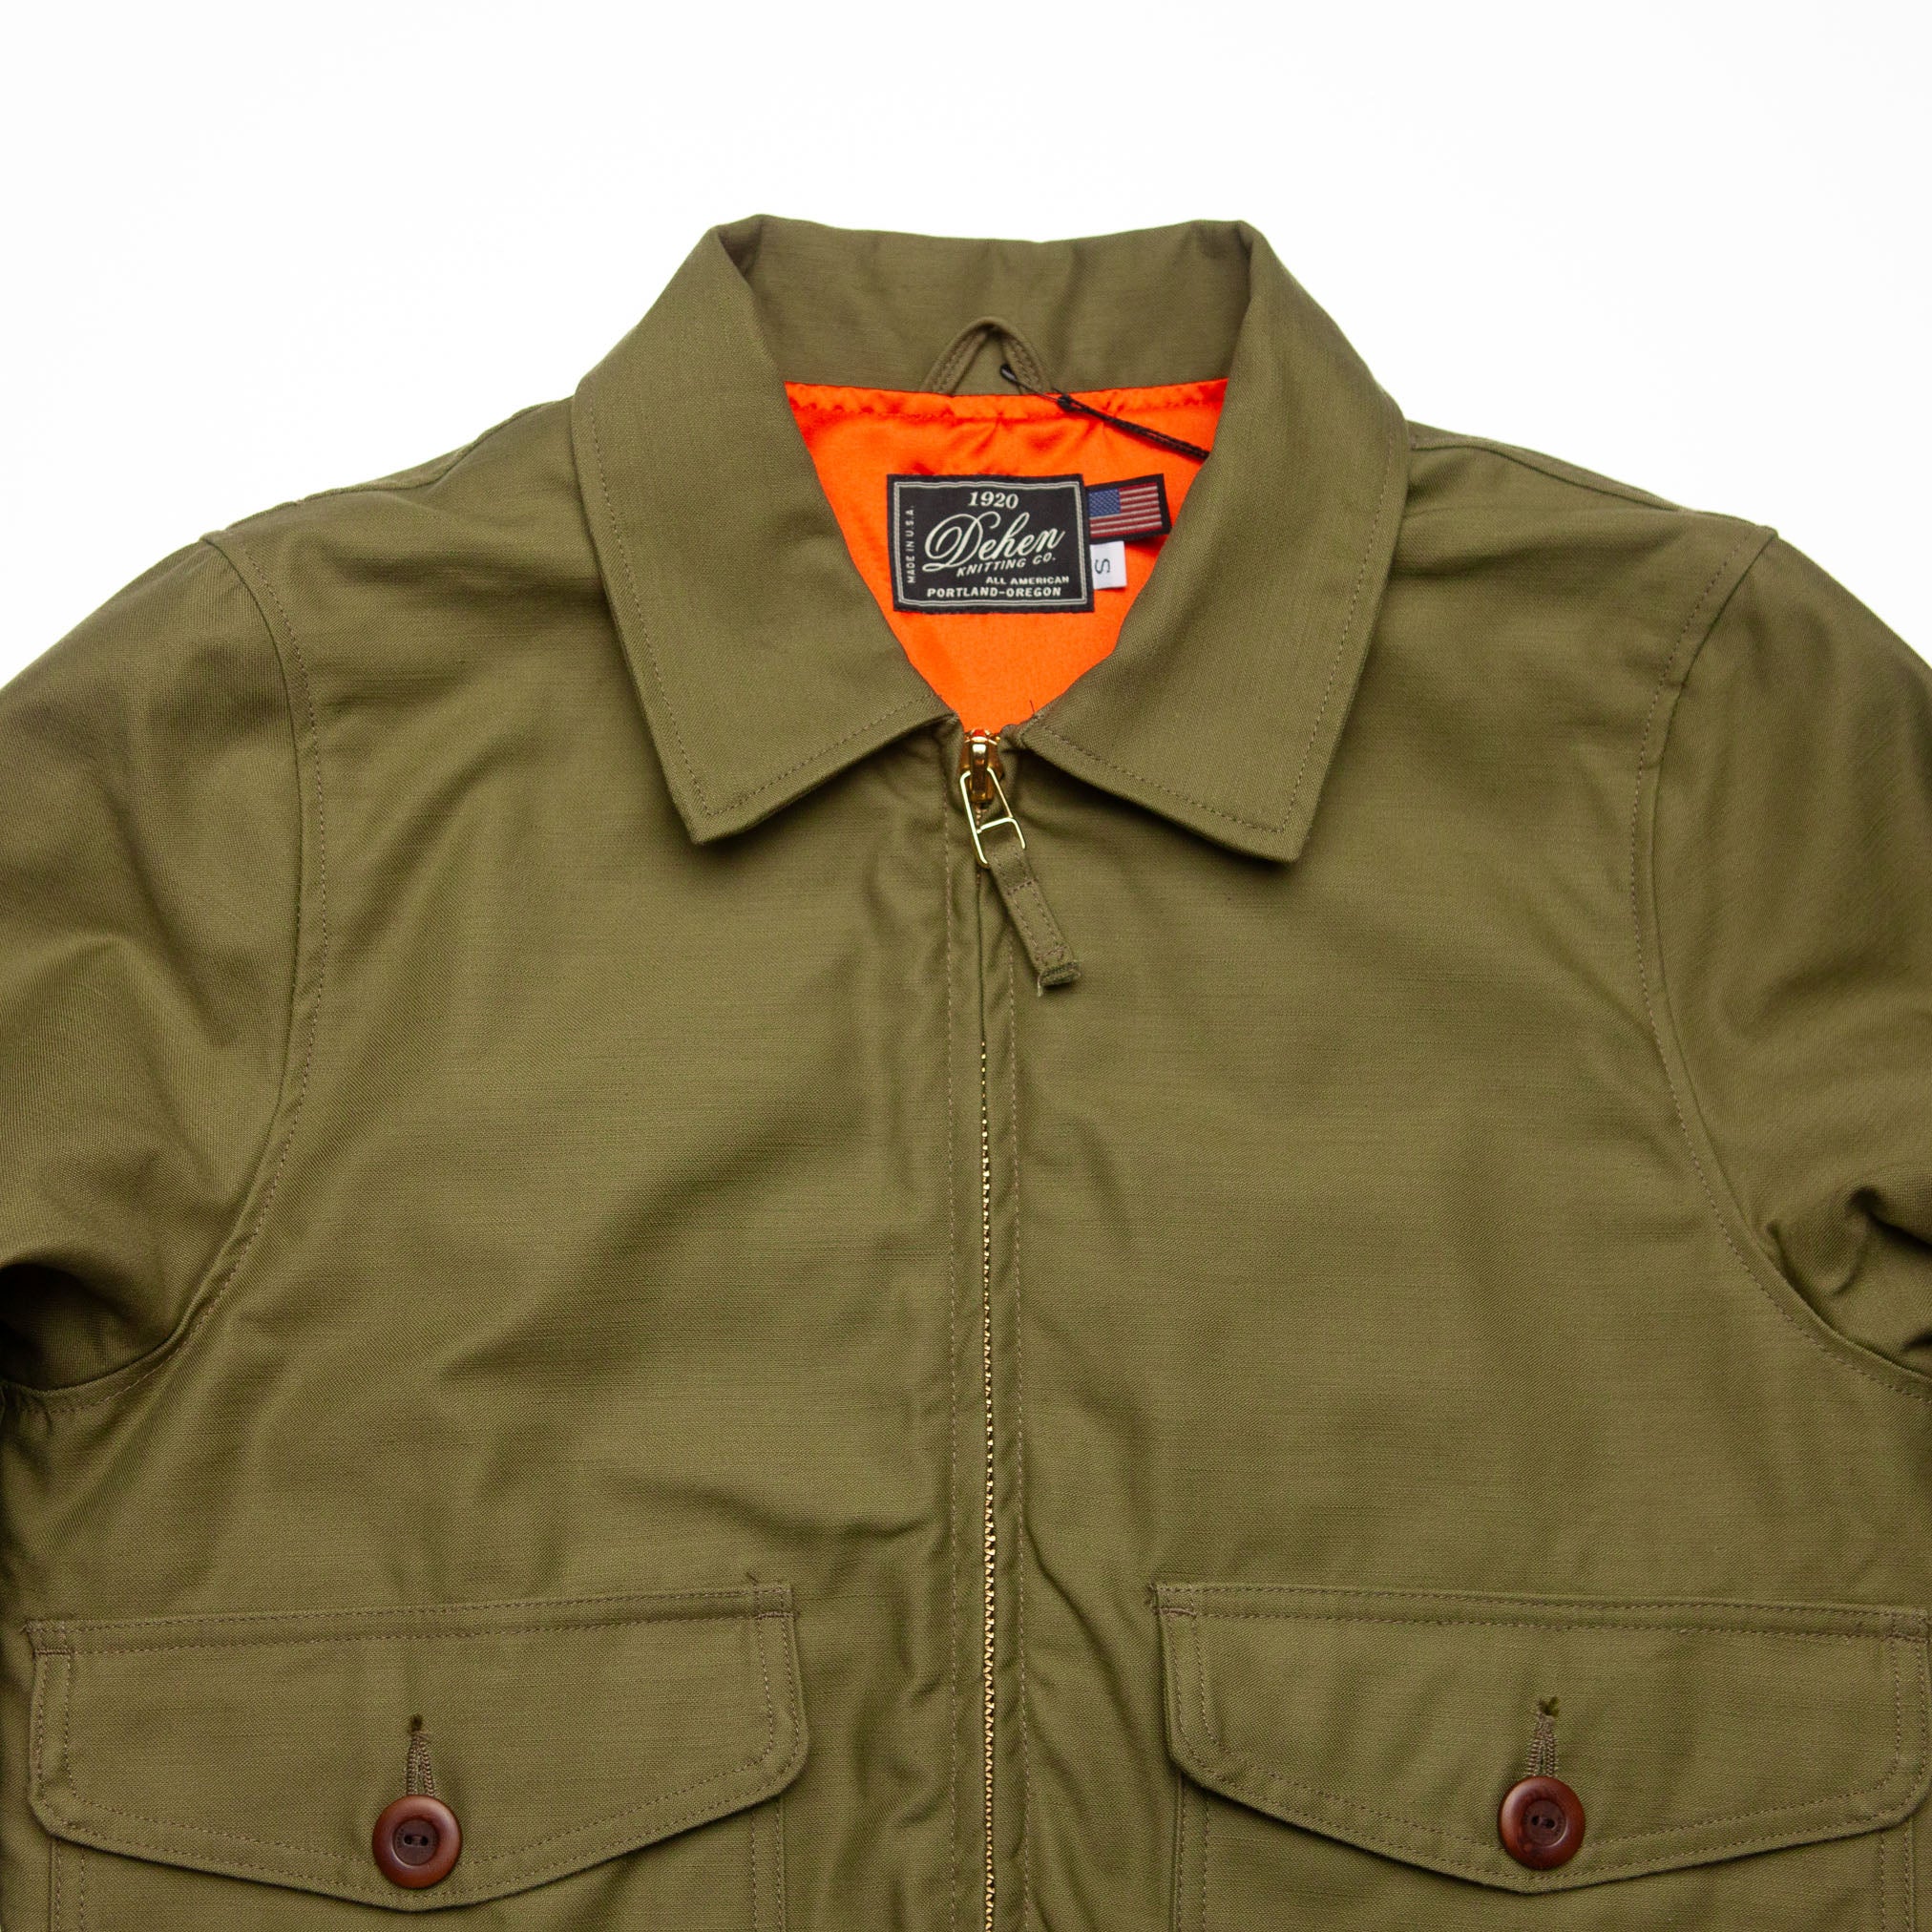 Carrier Jacket - S